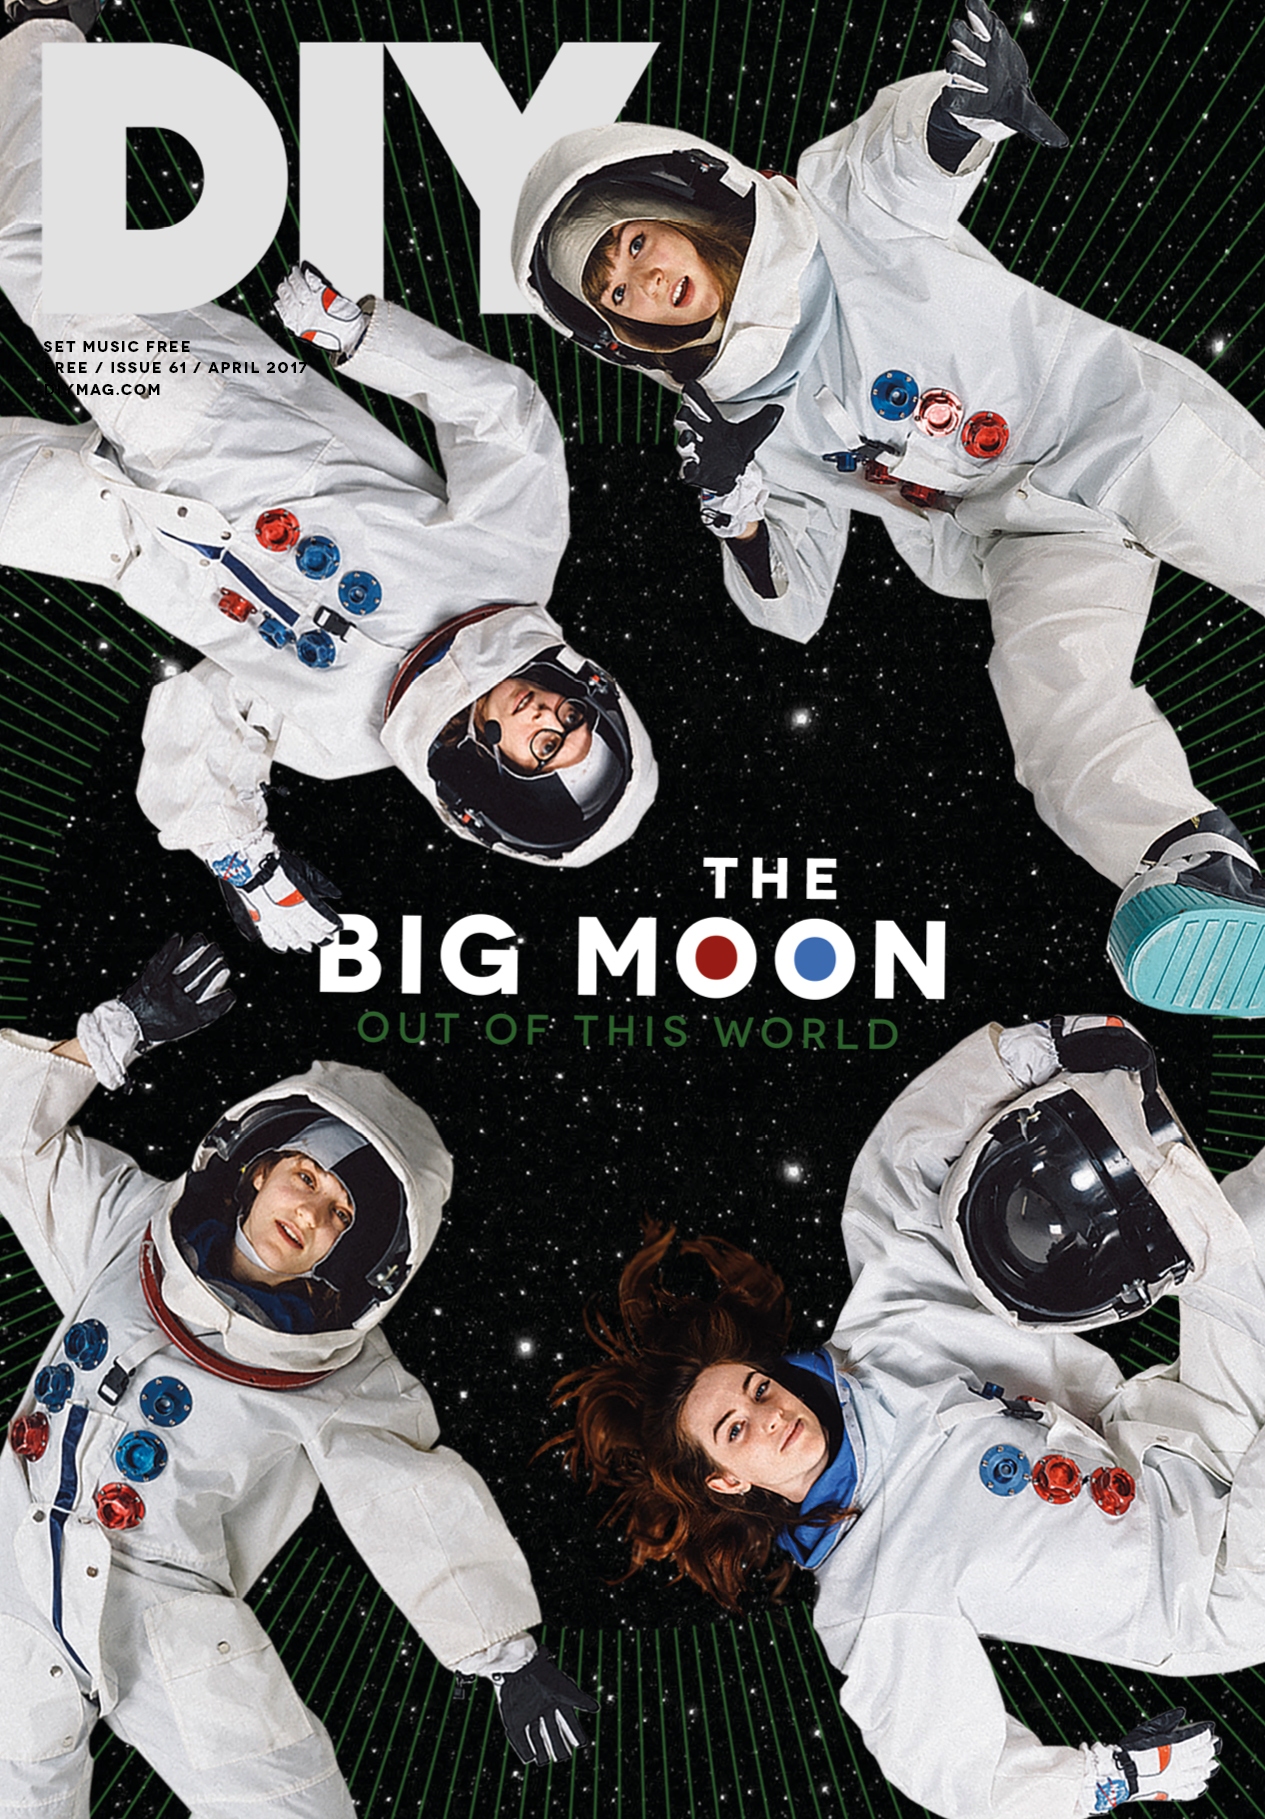 New issue of DIY out now, feat. The Big Moon, Future Islands, Diet Cig & more